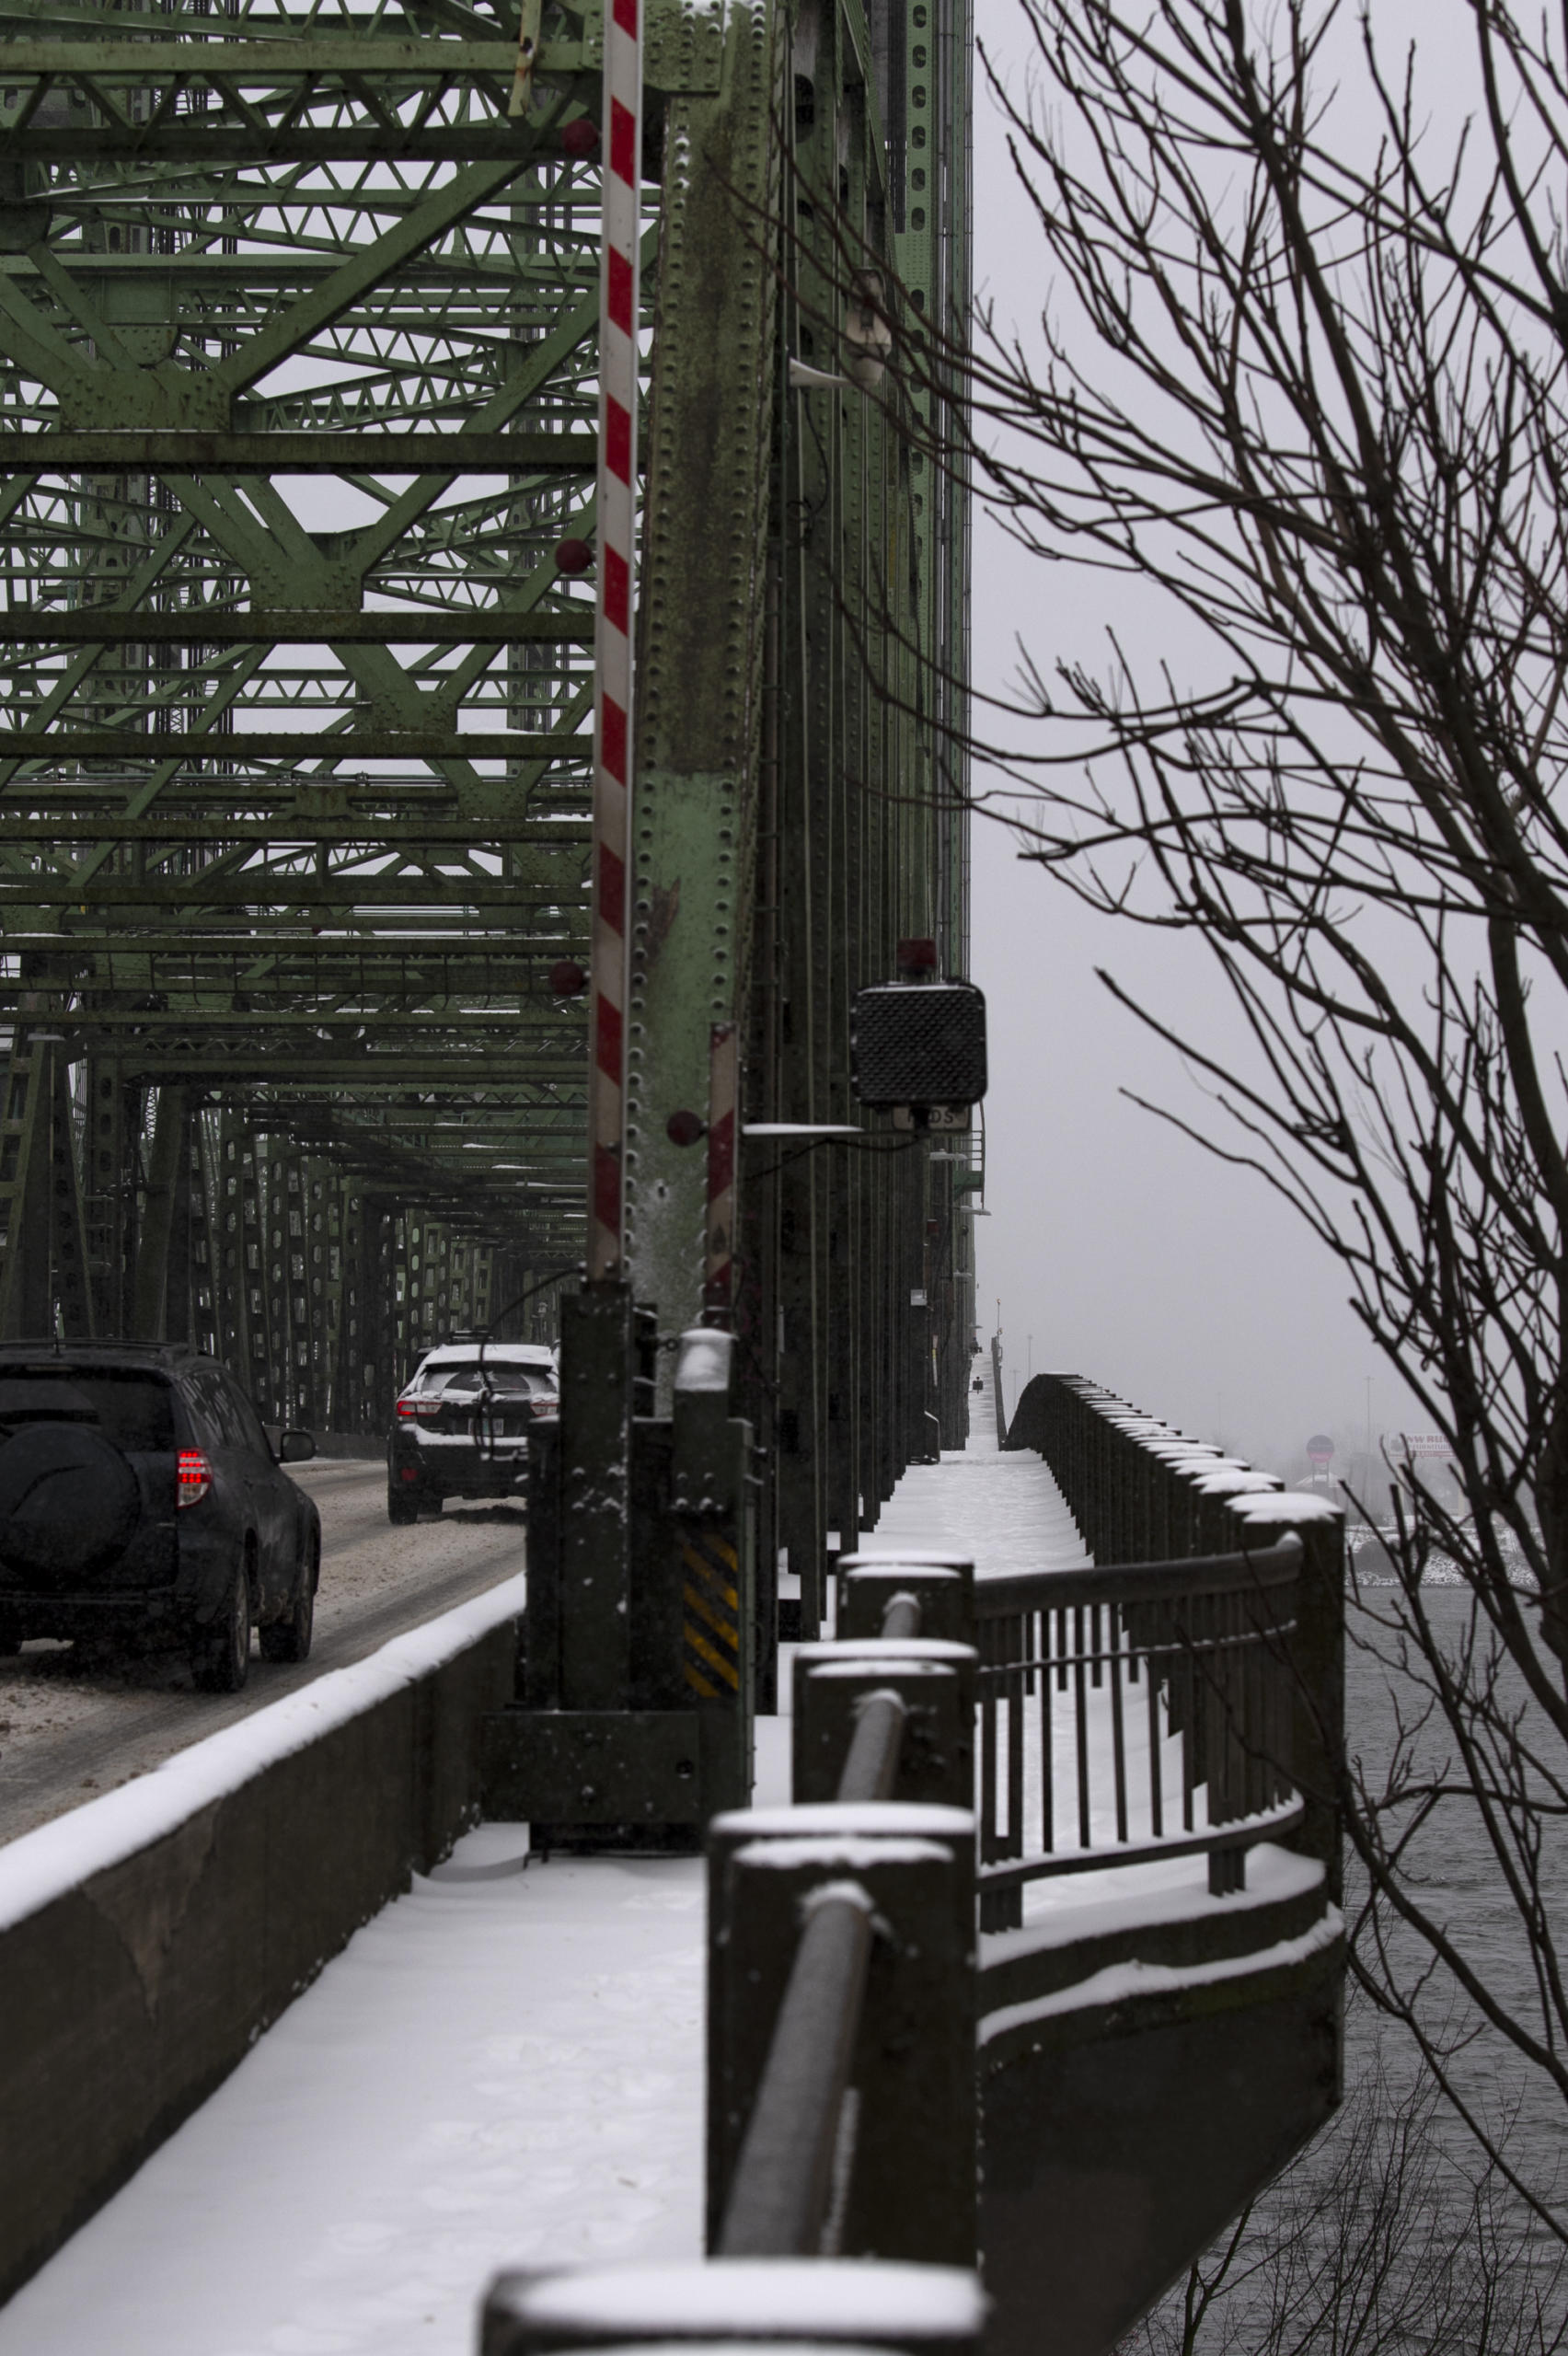 A snow-lined pedestrian walkway on the Interstate 5 bridge pictured on Friday afternoon, February 12, in downtown Vancouver.